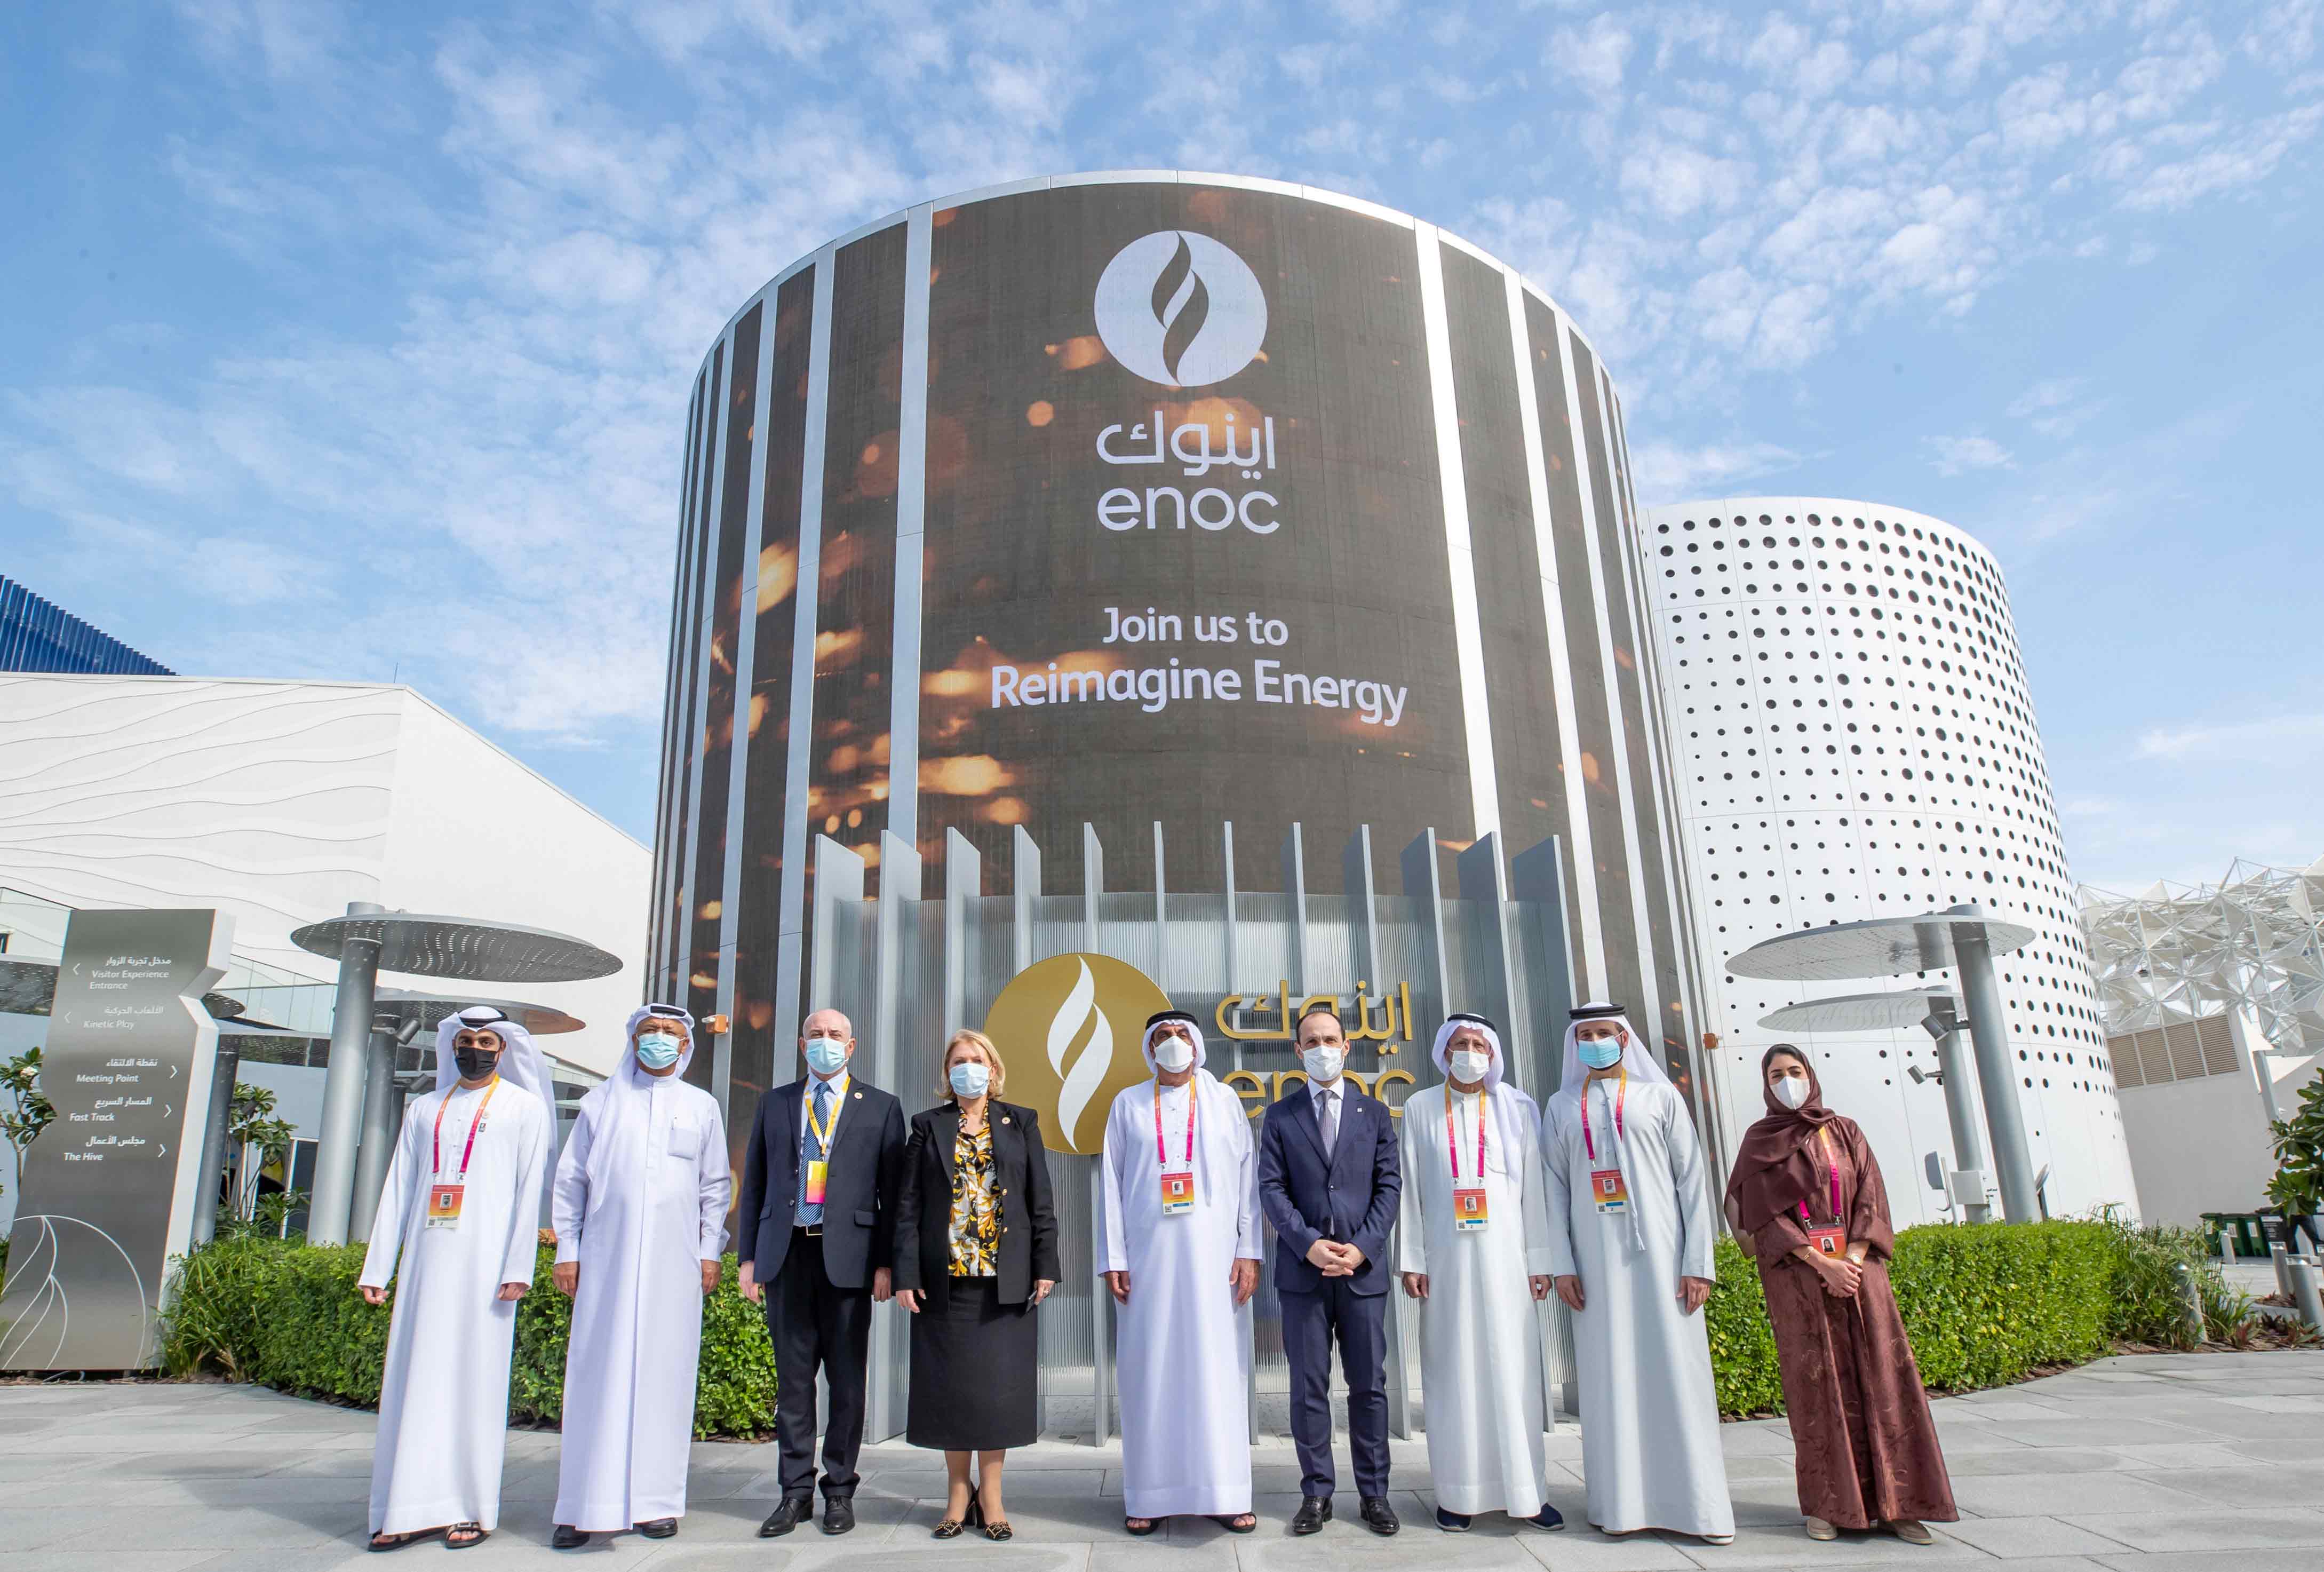 ENOC Group hosts Georgian Vice Prime Minister and official delegation at the Expo 2020 Dubai pavilion